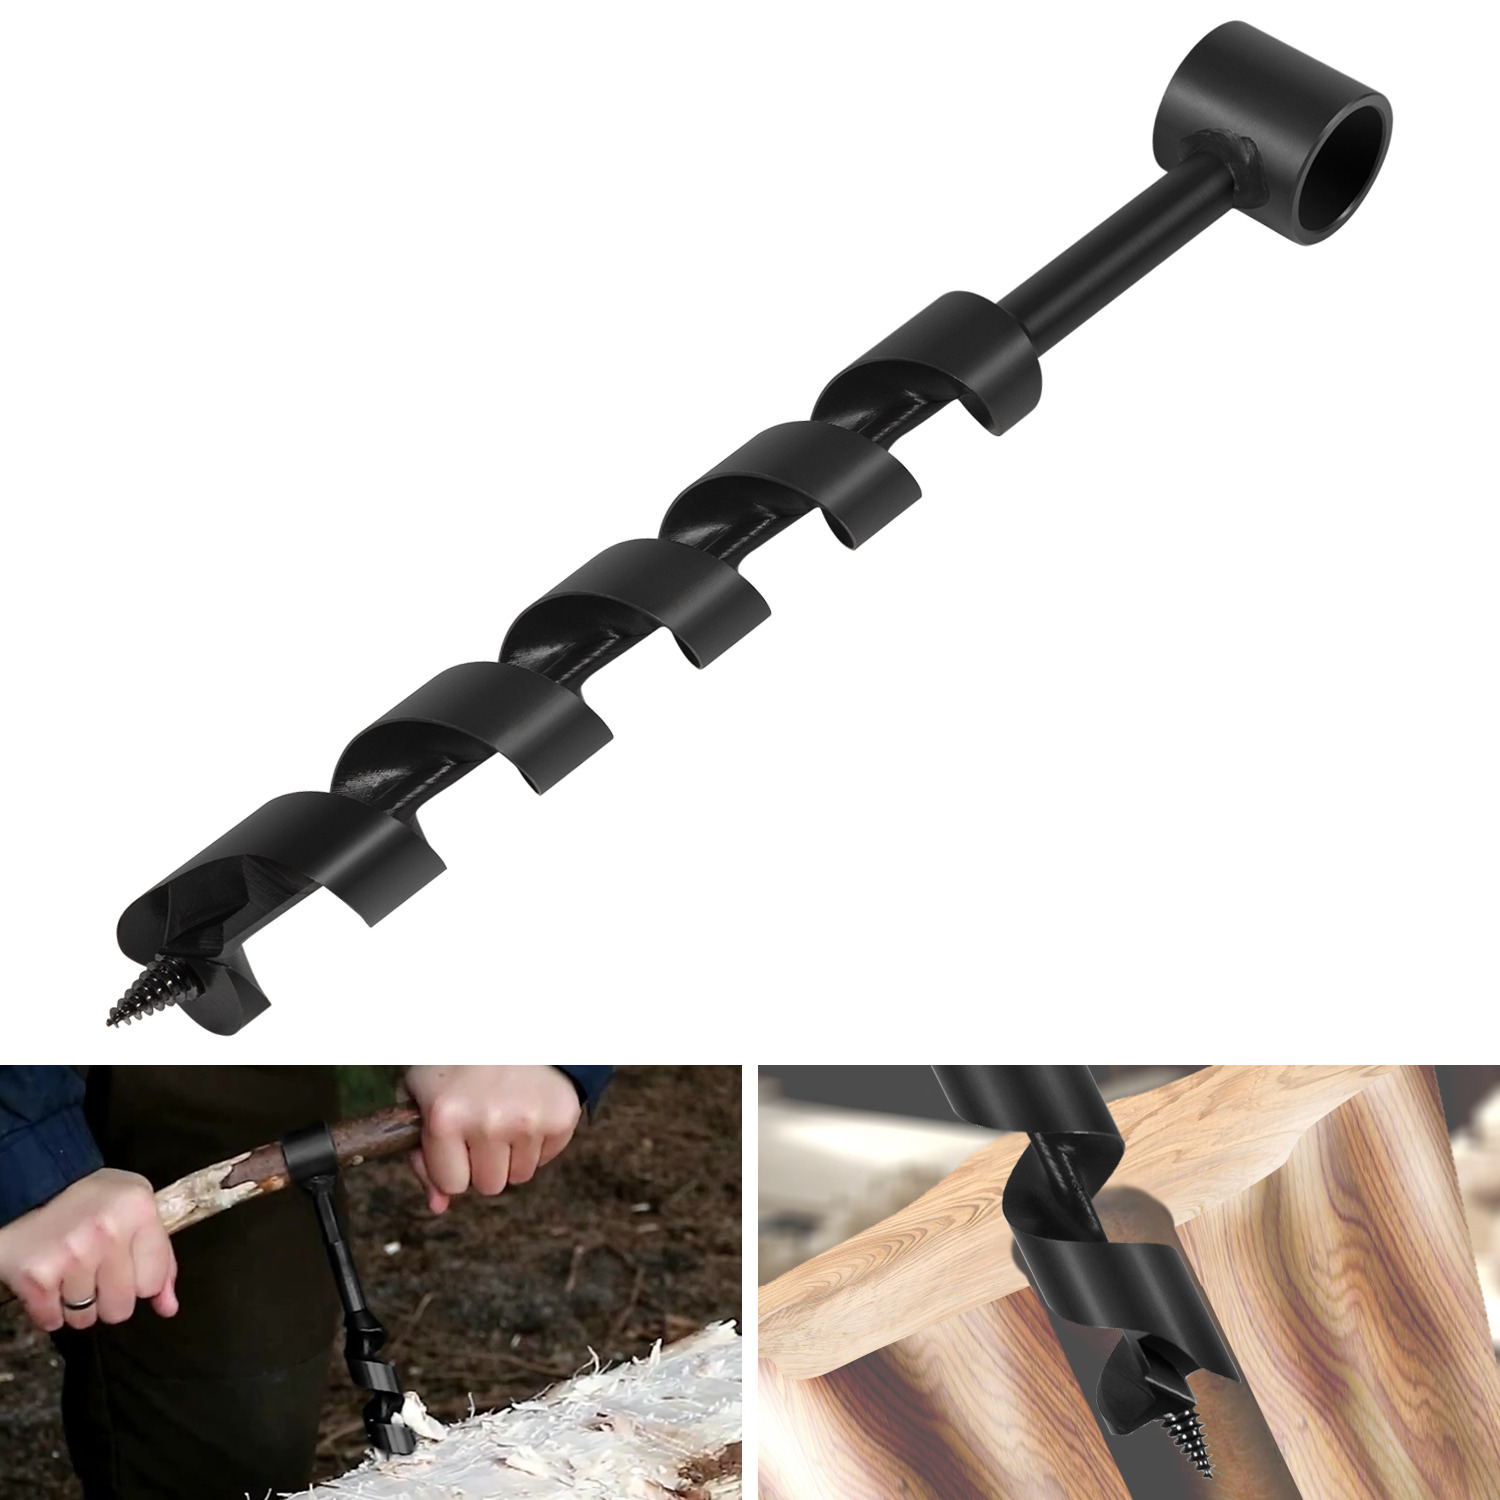 1” x 12” Scotch Eye Wood Auger Drill Bit for Bushcraft Backpack and Camping